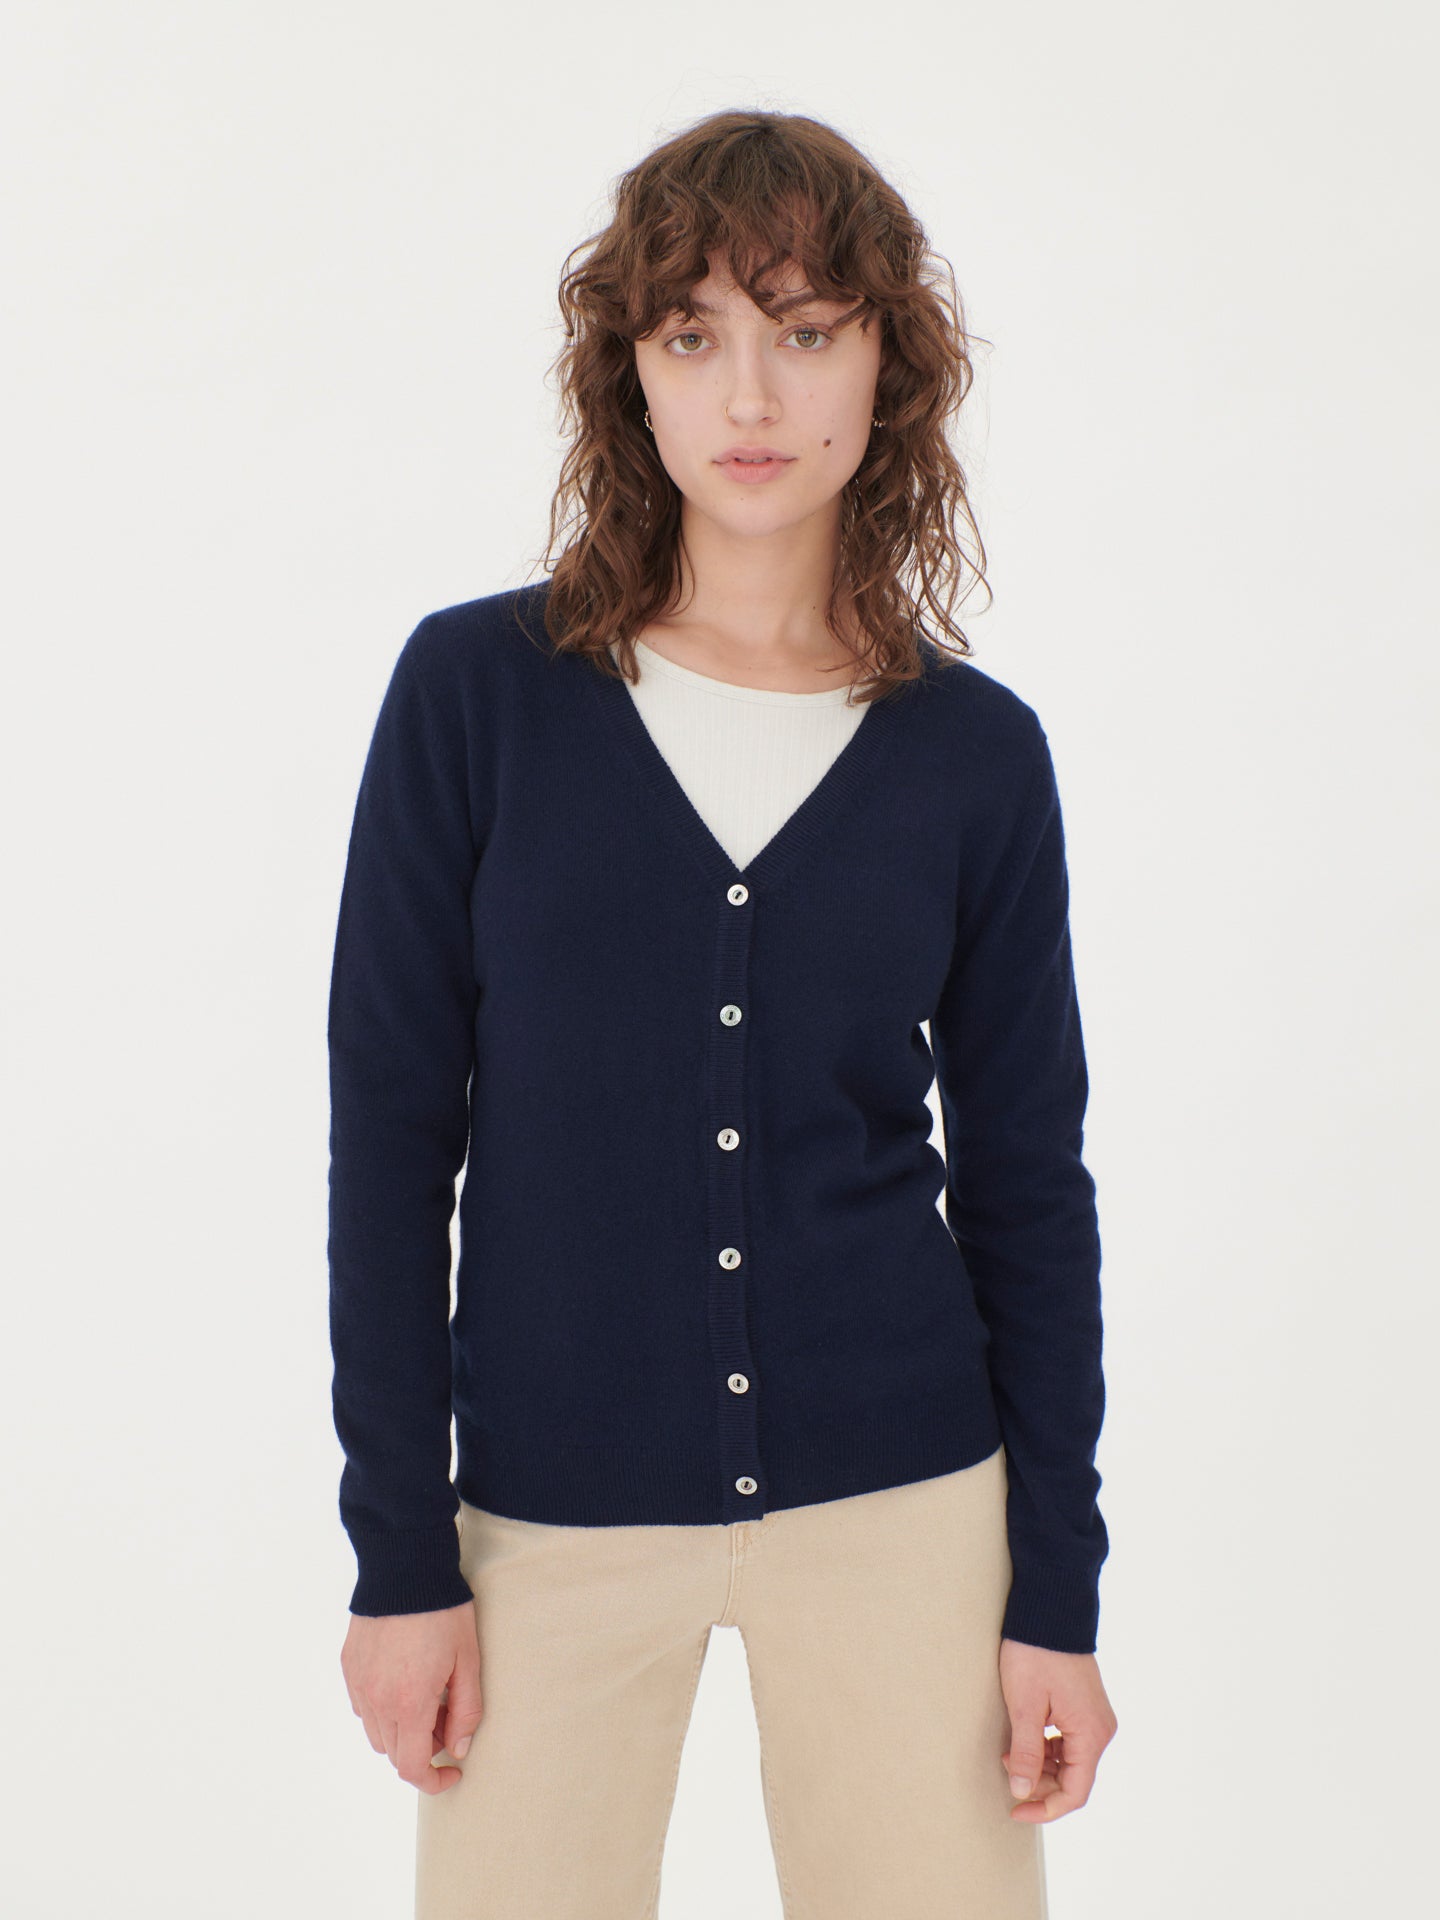 Wrap Yourself in Women's Cashmere Cardigans | GOBI Cashmere